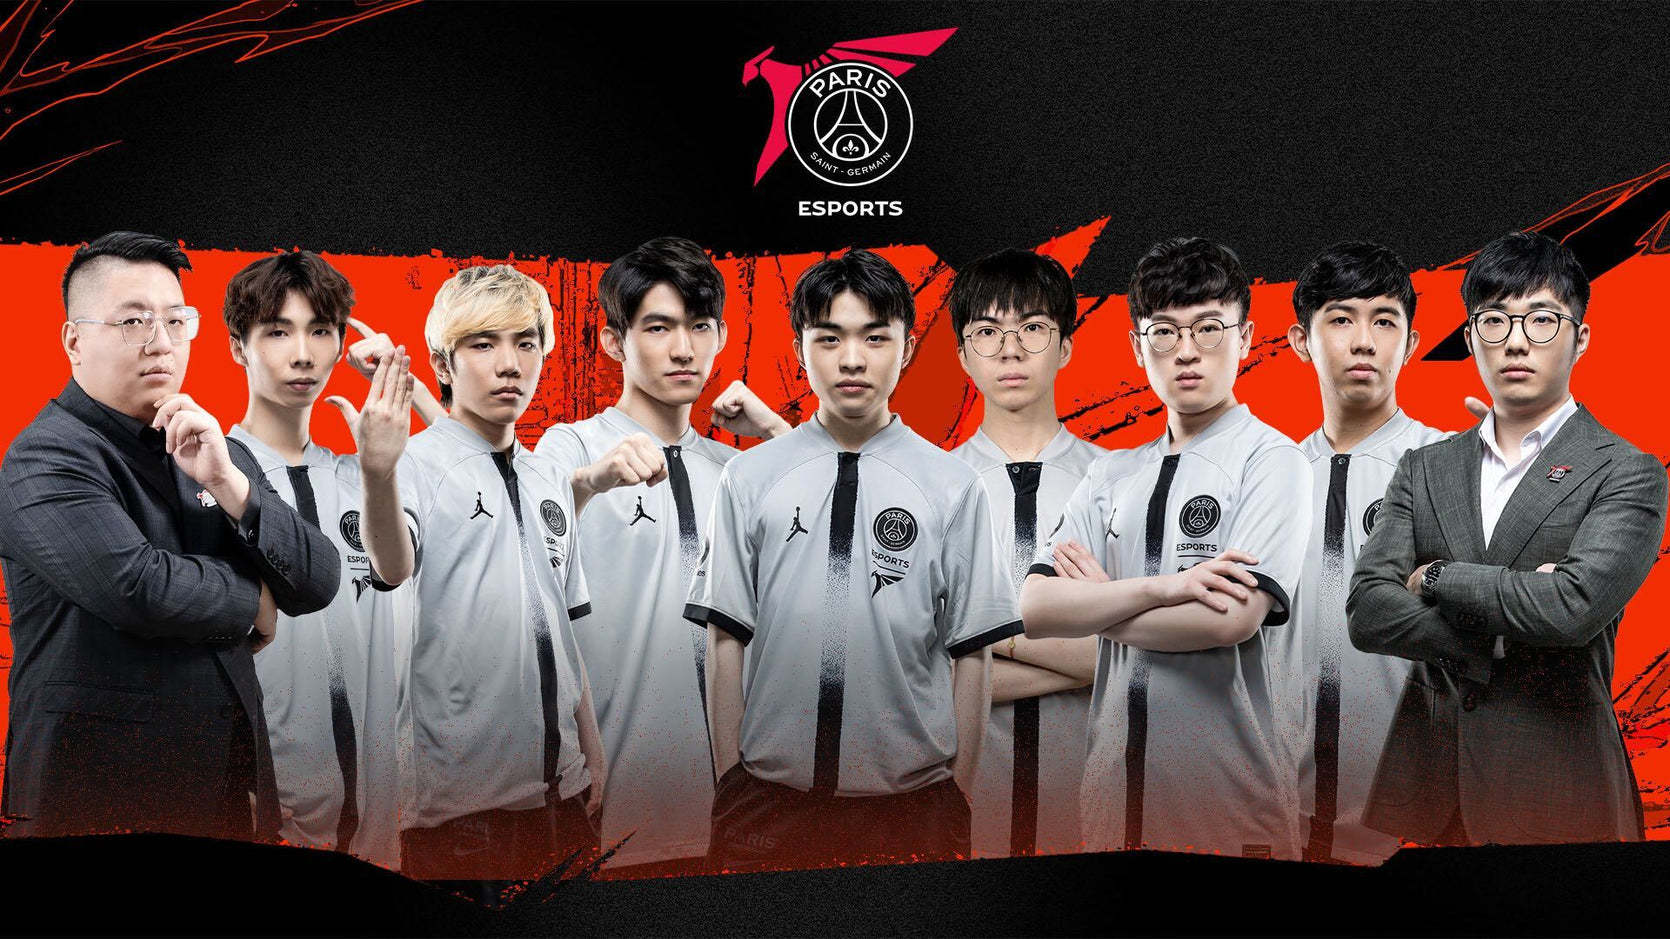 PSG Esports and Talon will continue together for the next three years